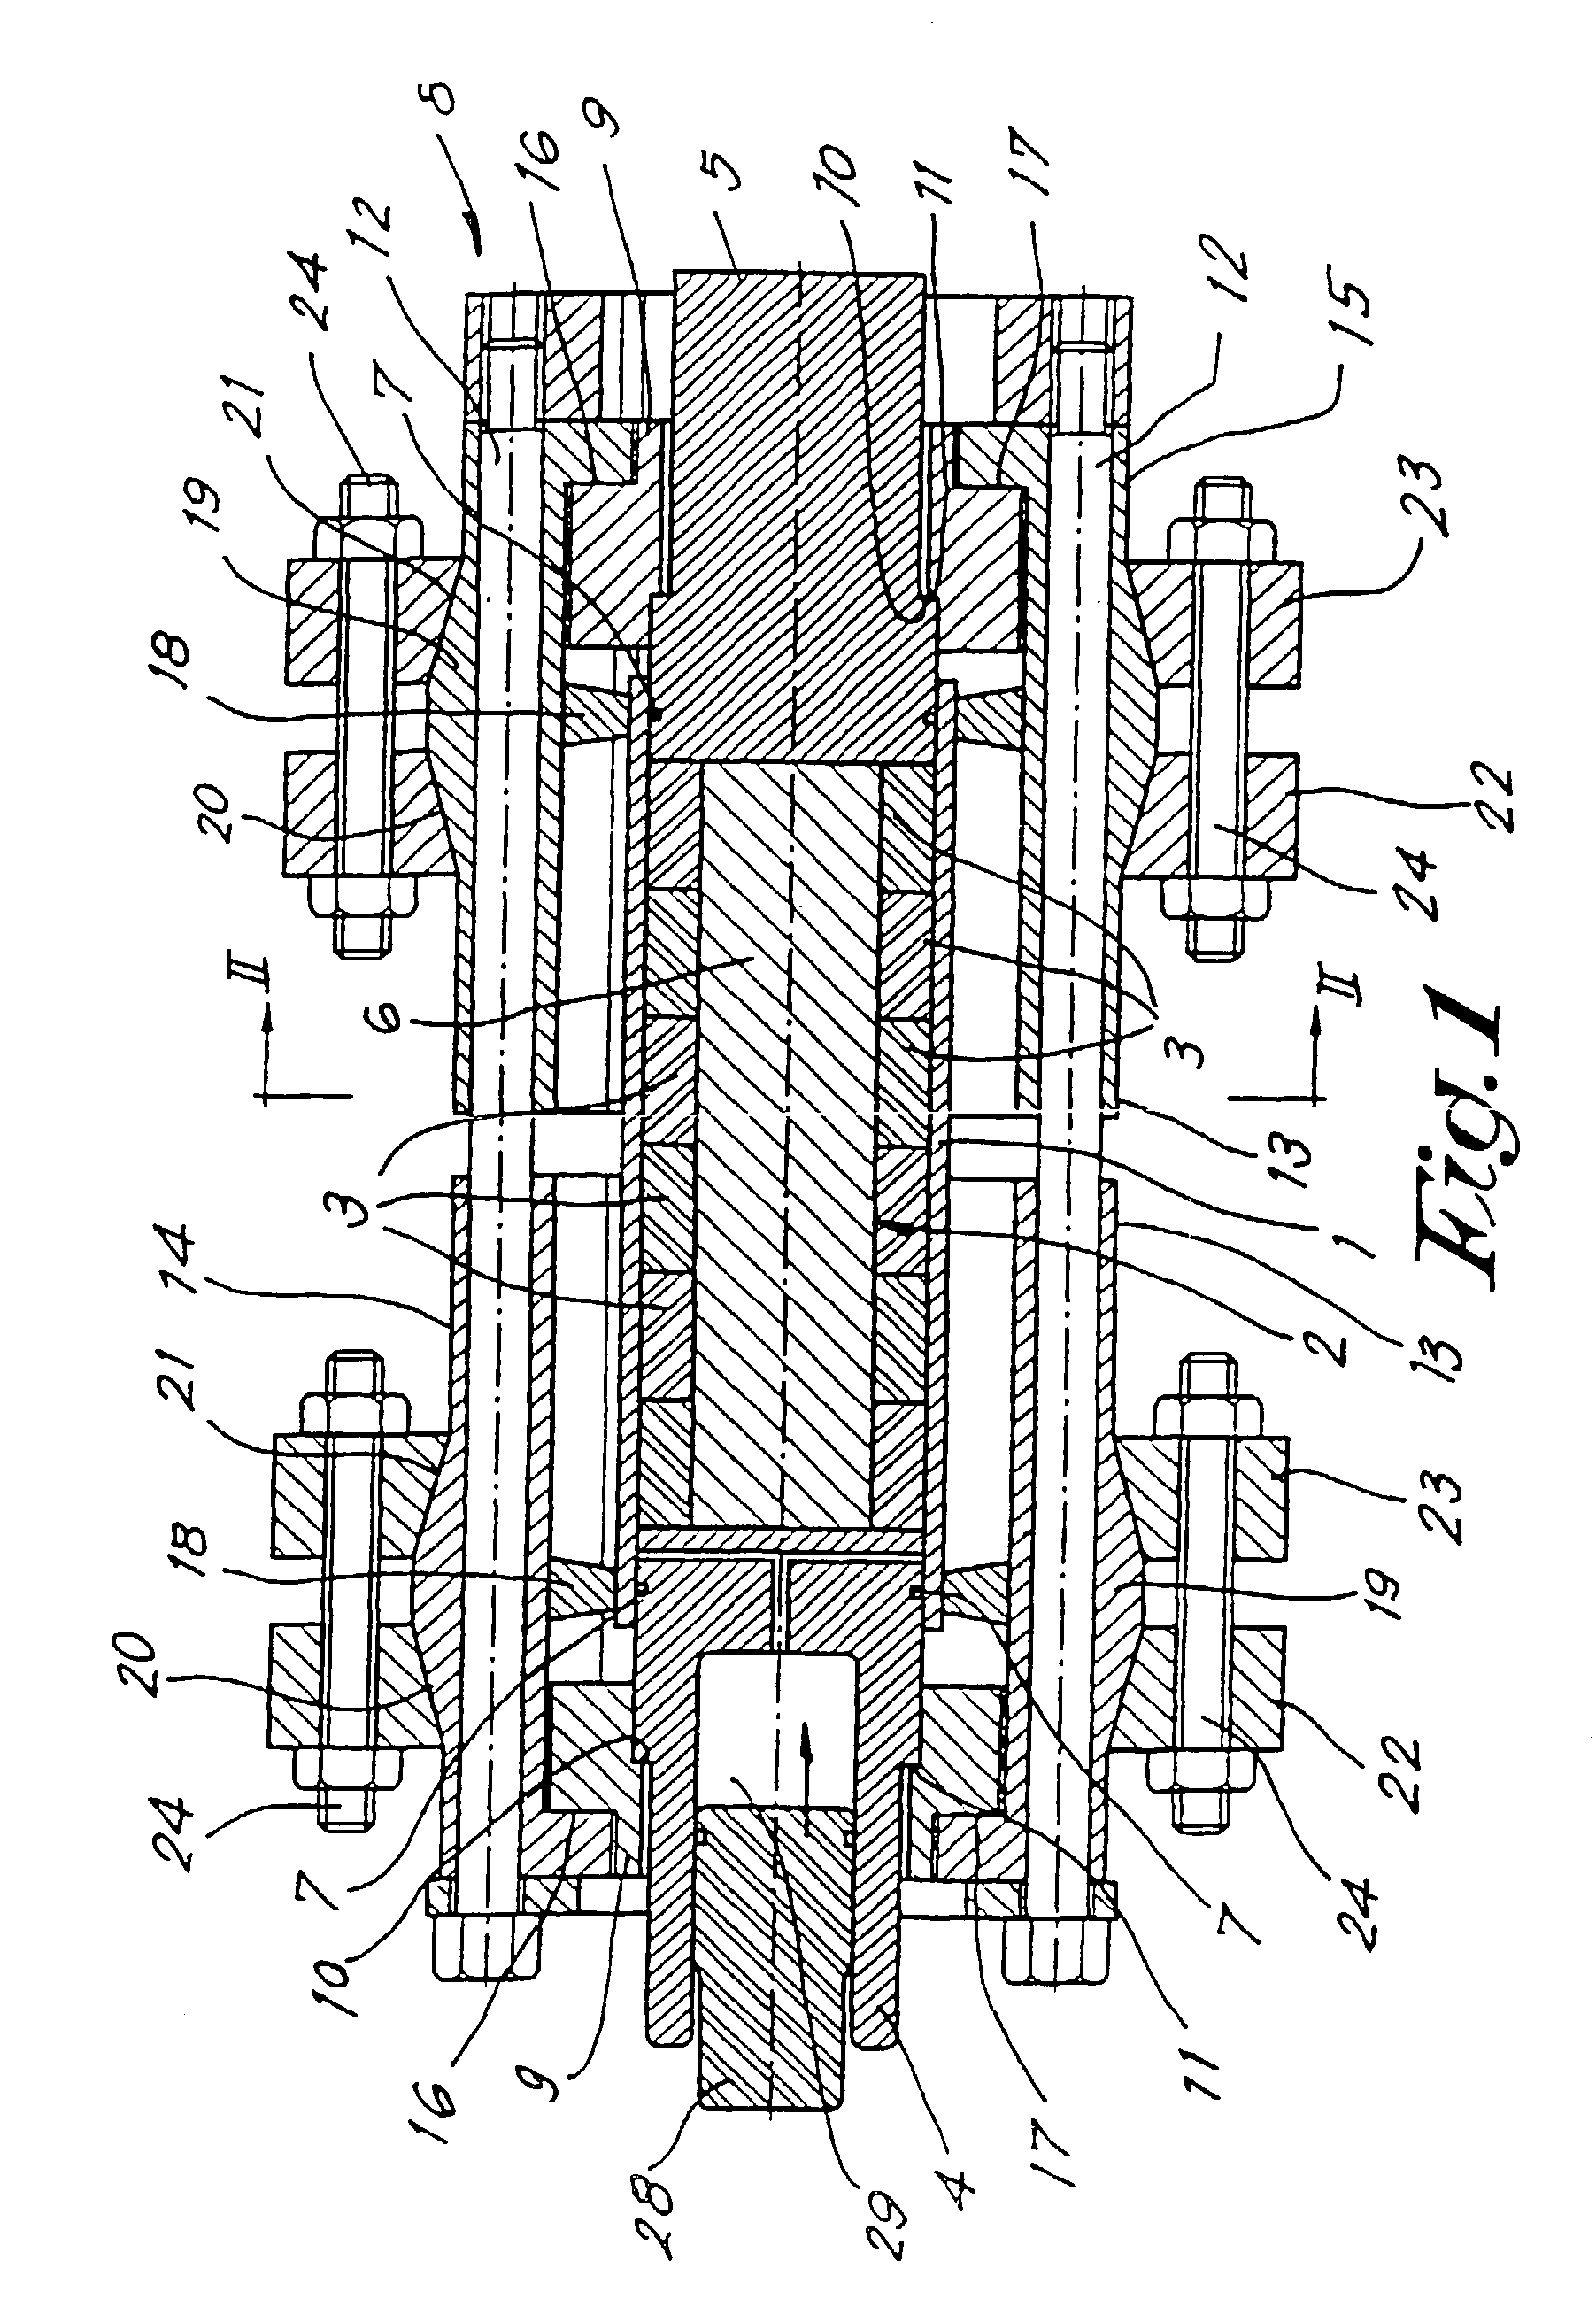 Method for manufacturing a permanent-magnet excited rotor for a high speed electric motor